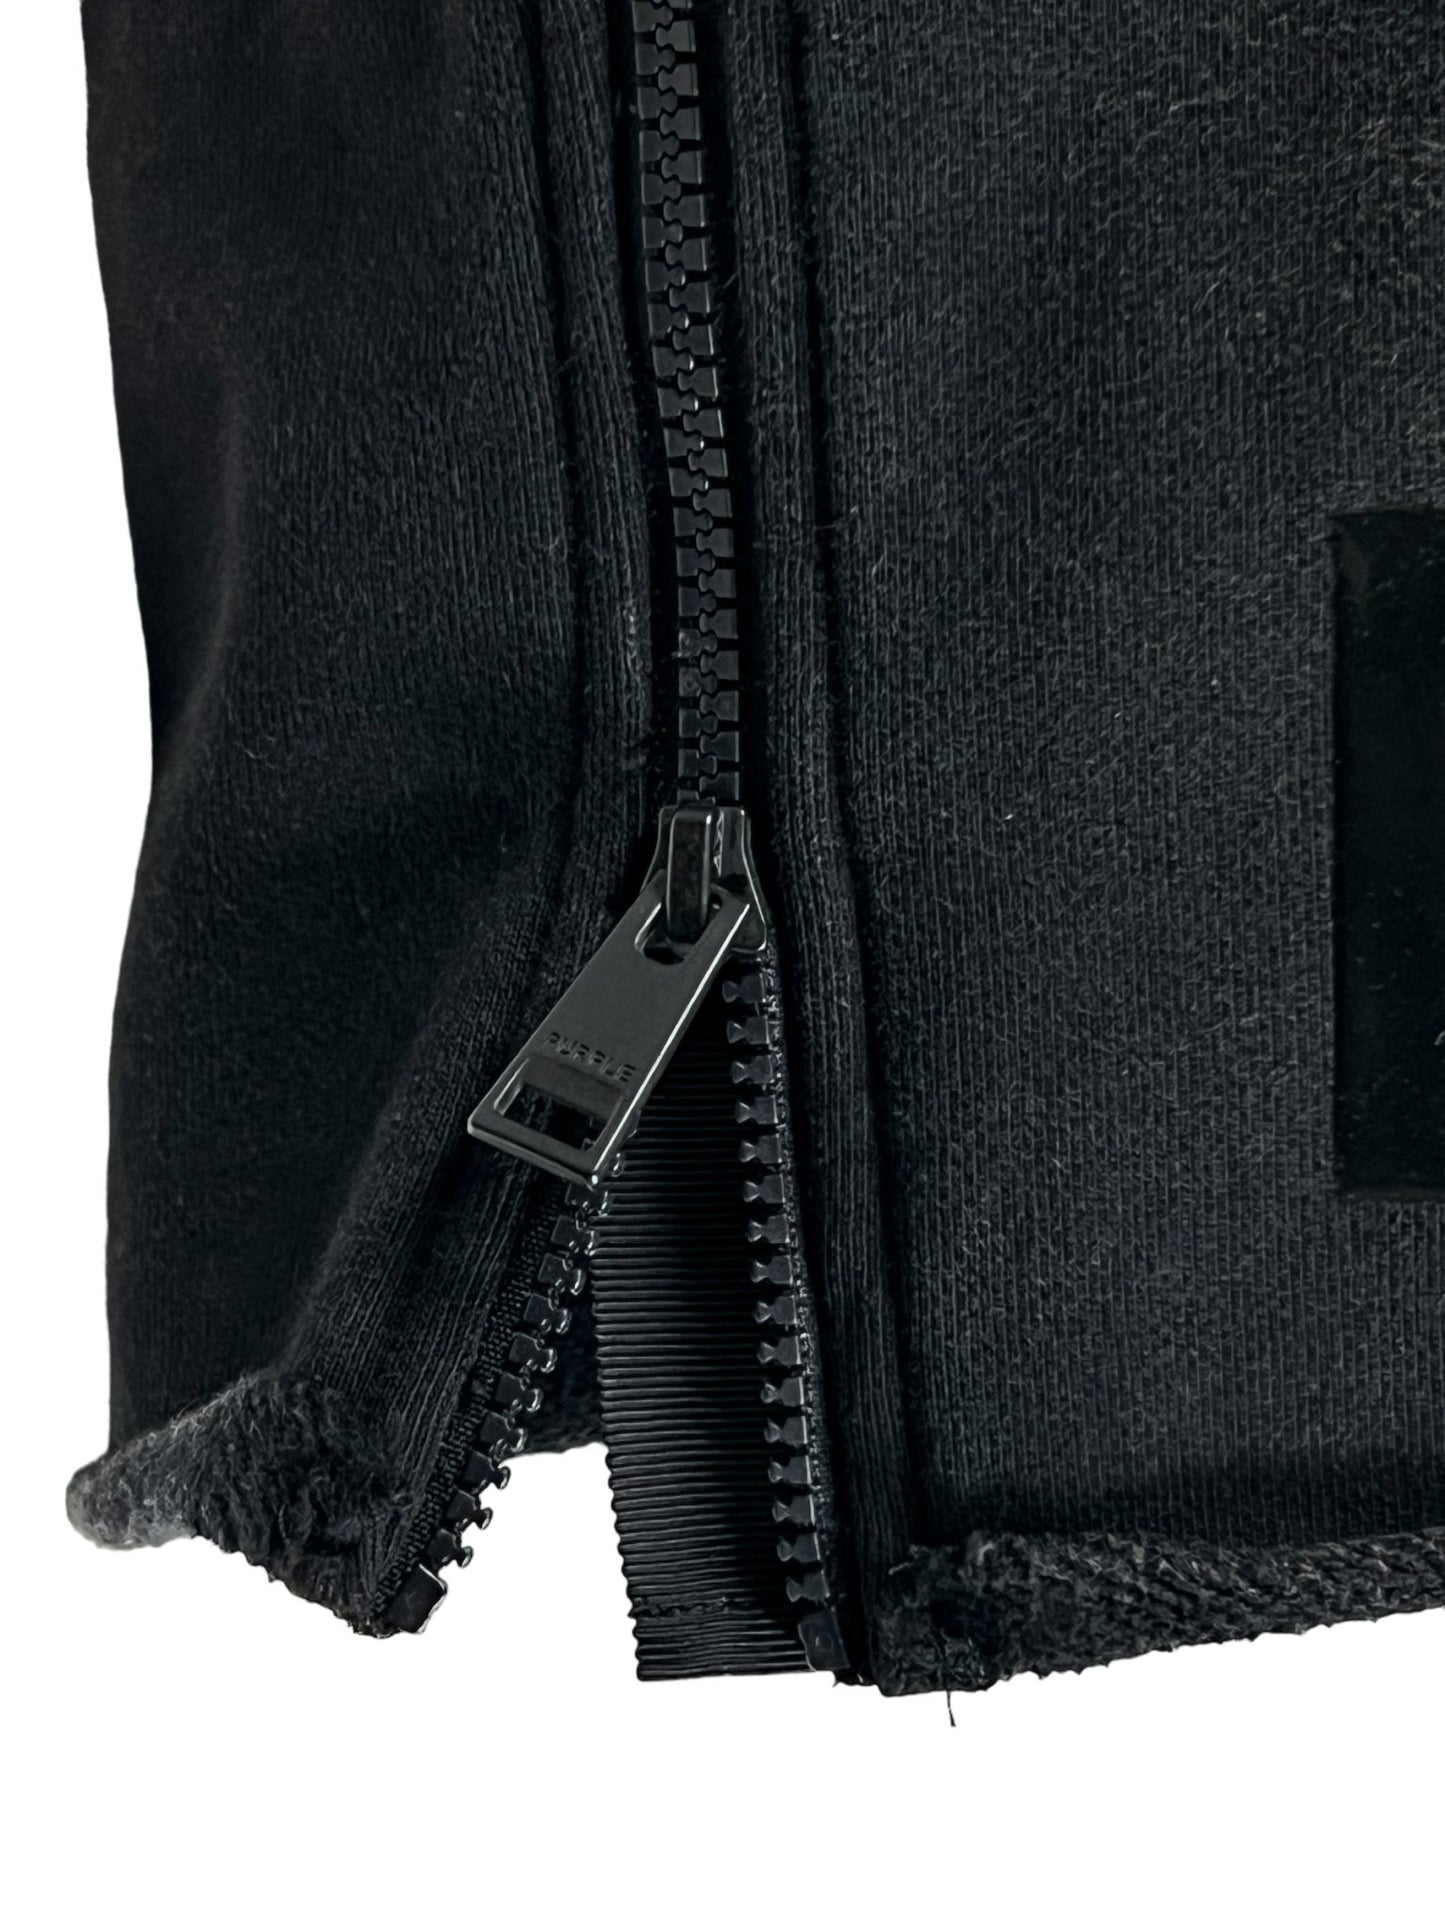 Close-up view of a partially unzipped black zipper on a black fabric. The bottom zipper edge shows frayed material, typical of well-worn PURPLE BRAND P479-MFBW MWT FLEECE SWEATSHORT BLACK from PURPLE BRAND.